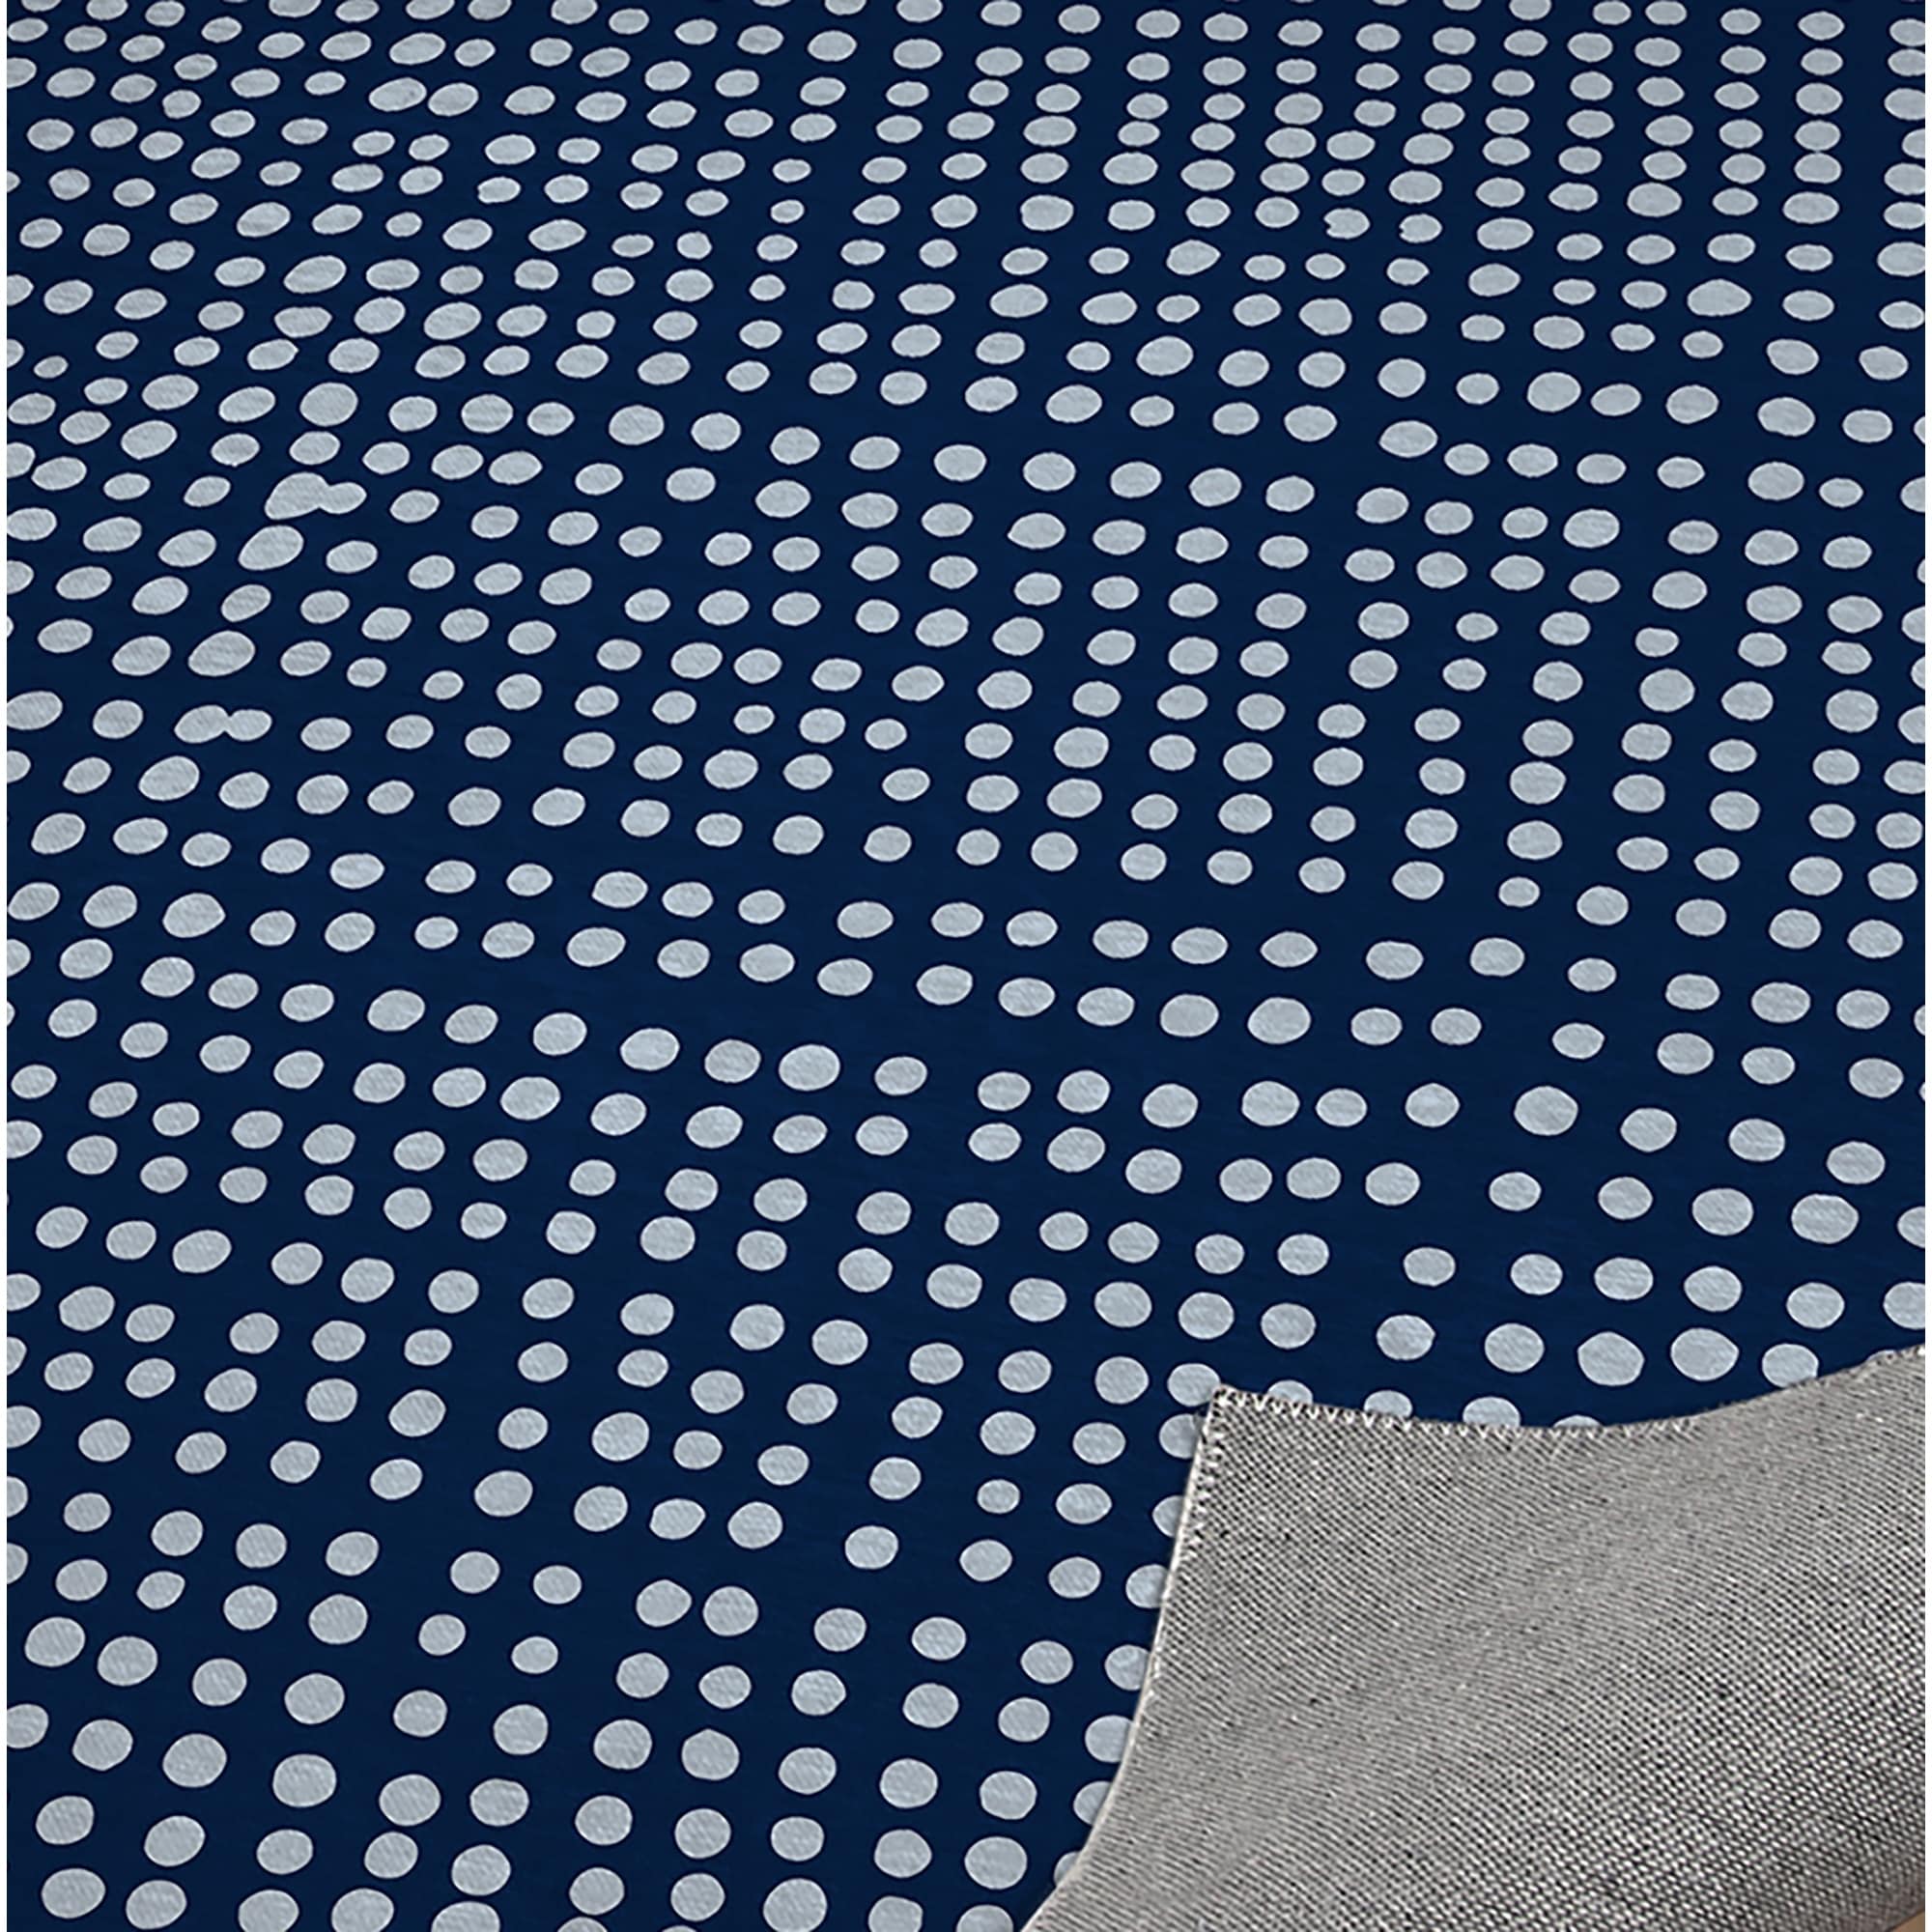 https://ak1.ostkcdn.com/images/products/is/images/direct/812cf68fd1132ca06d218ccebfe7d32e145844ba/DOTS-ABSTRACT-NAVY-Indoor-Door-Mat-By-Kavka-Designs.jpg